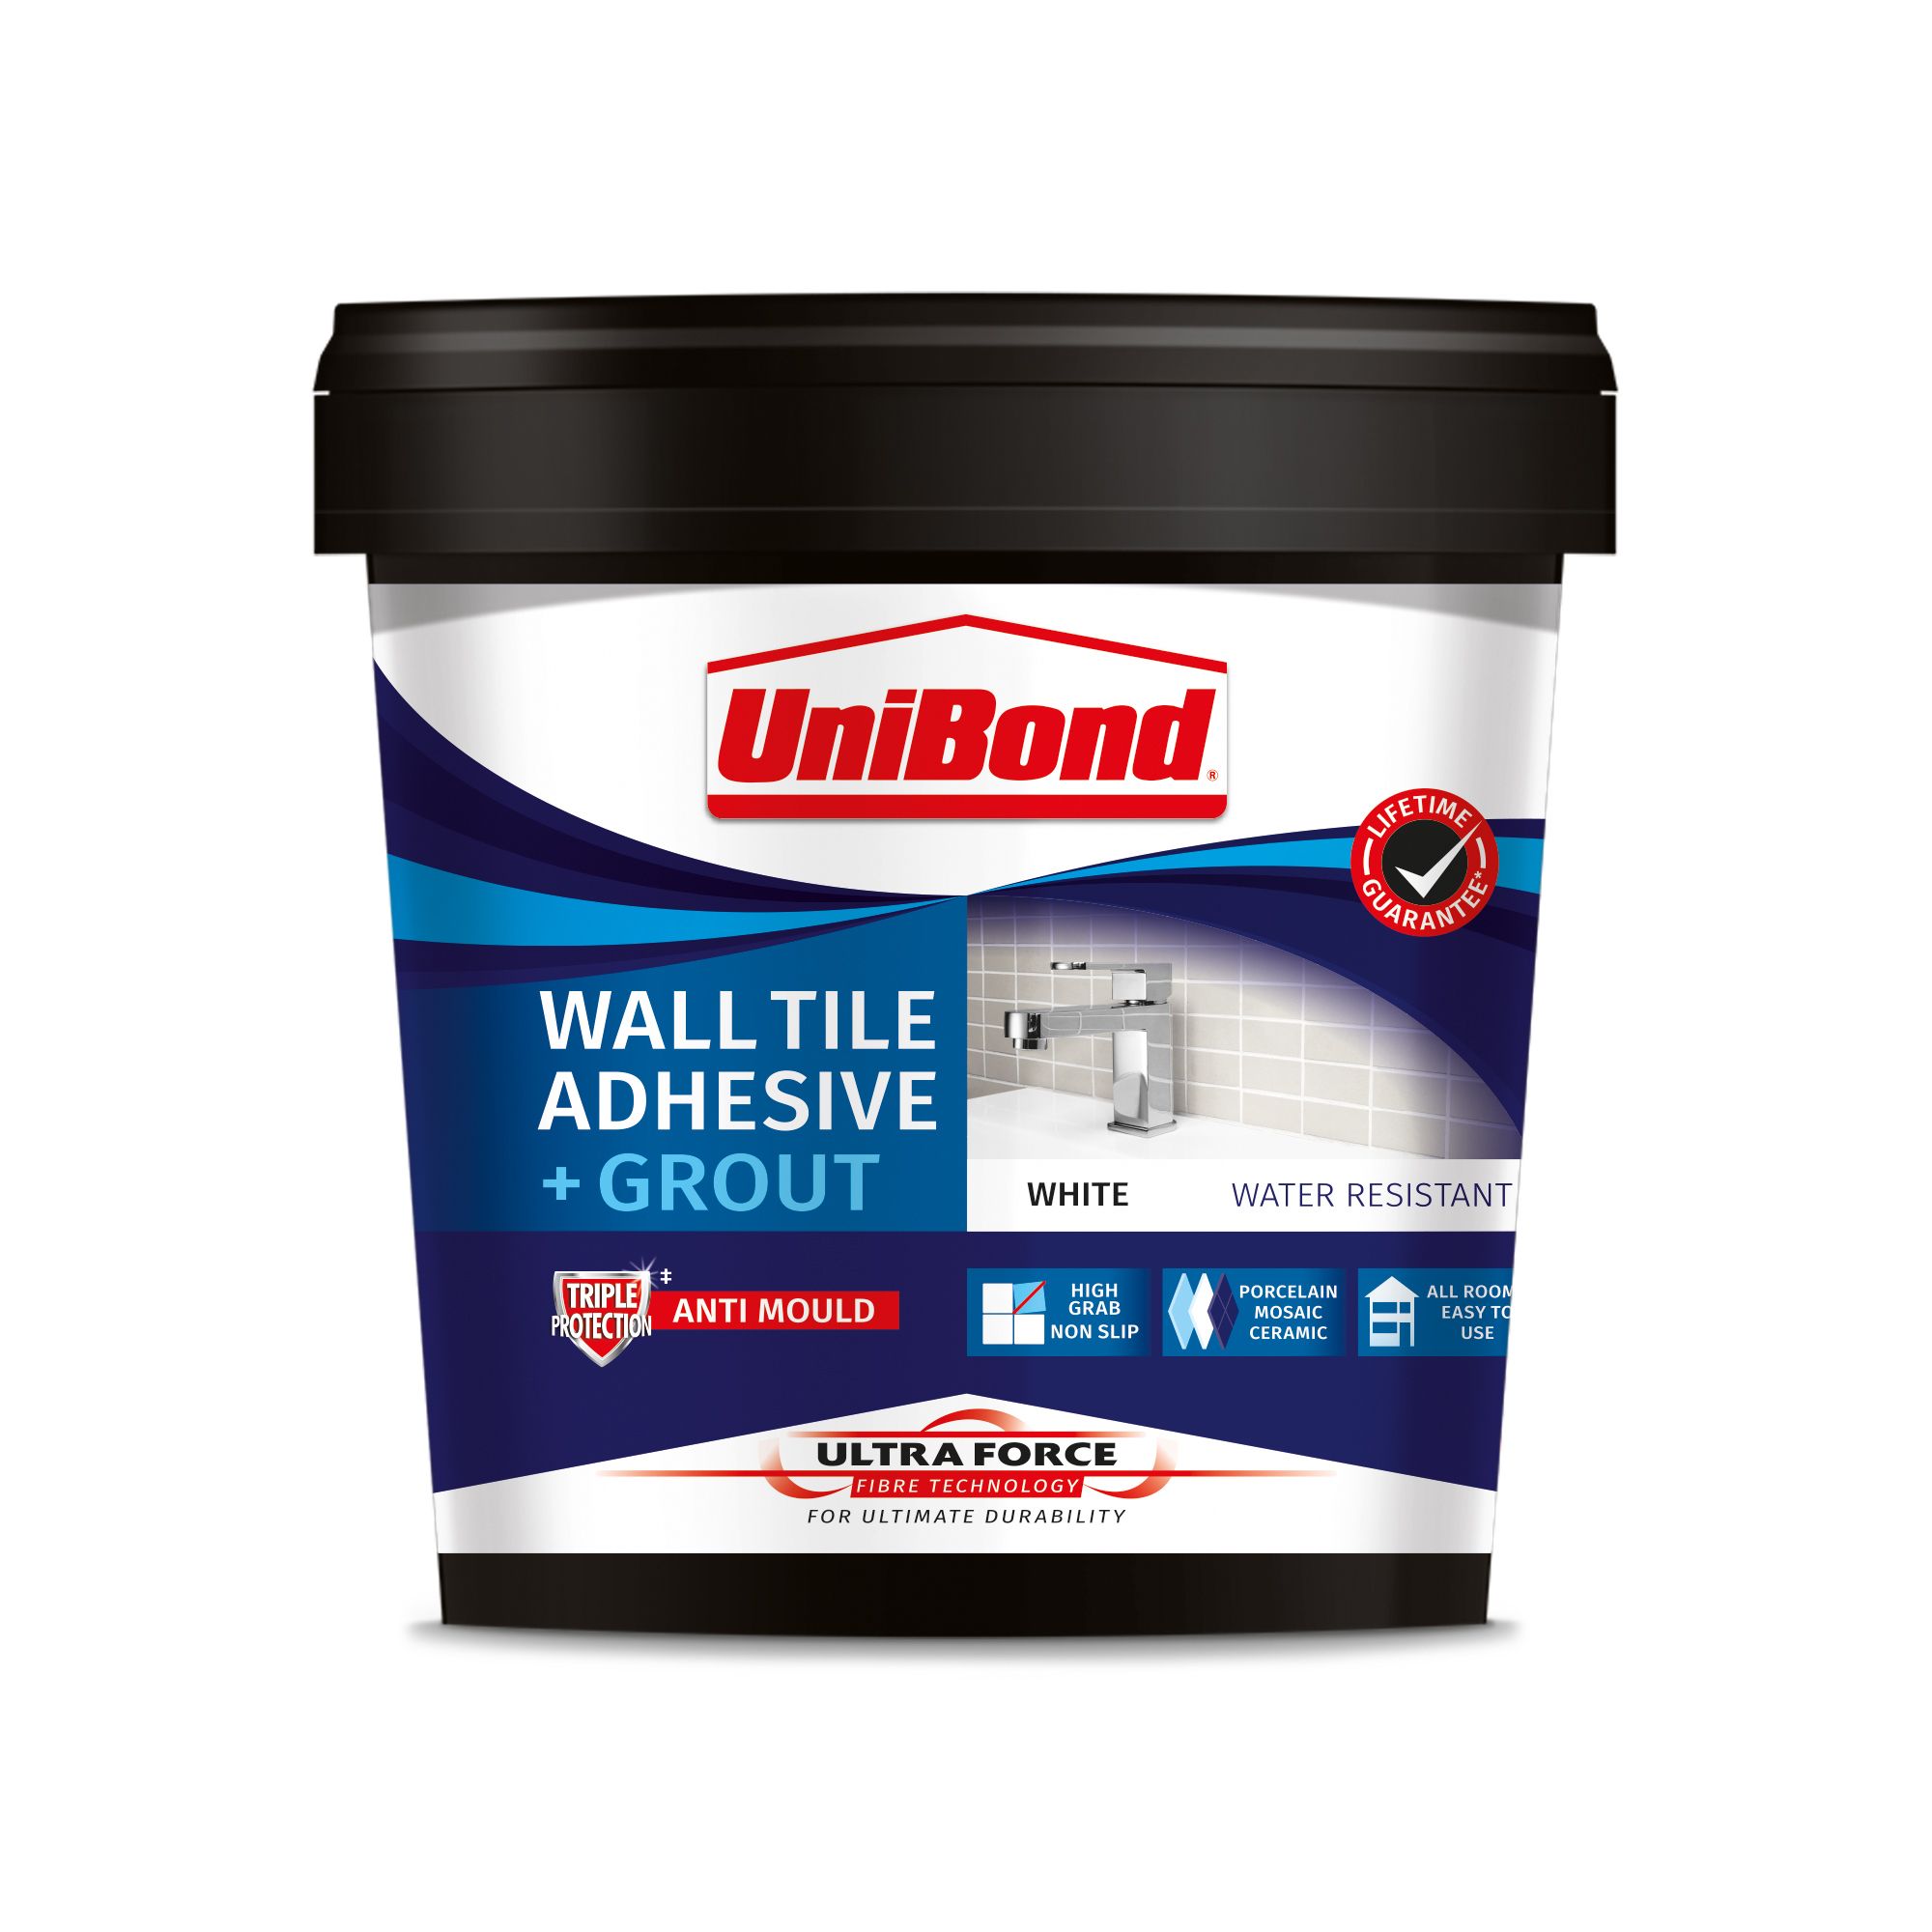 TIle adhesive or grout